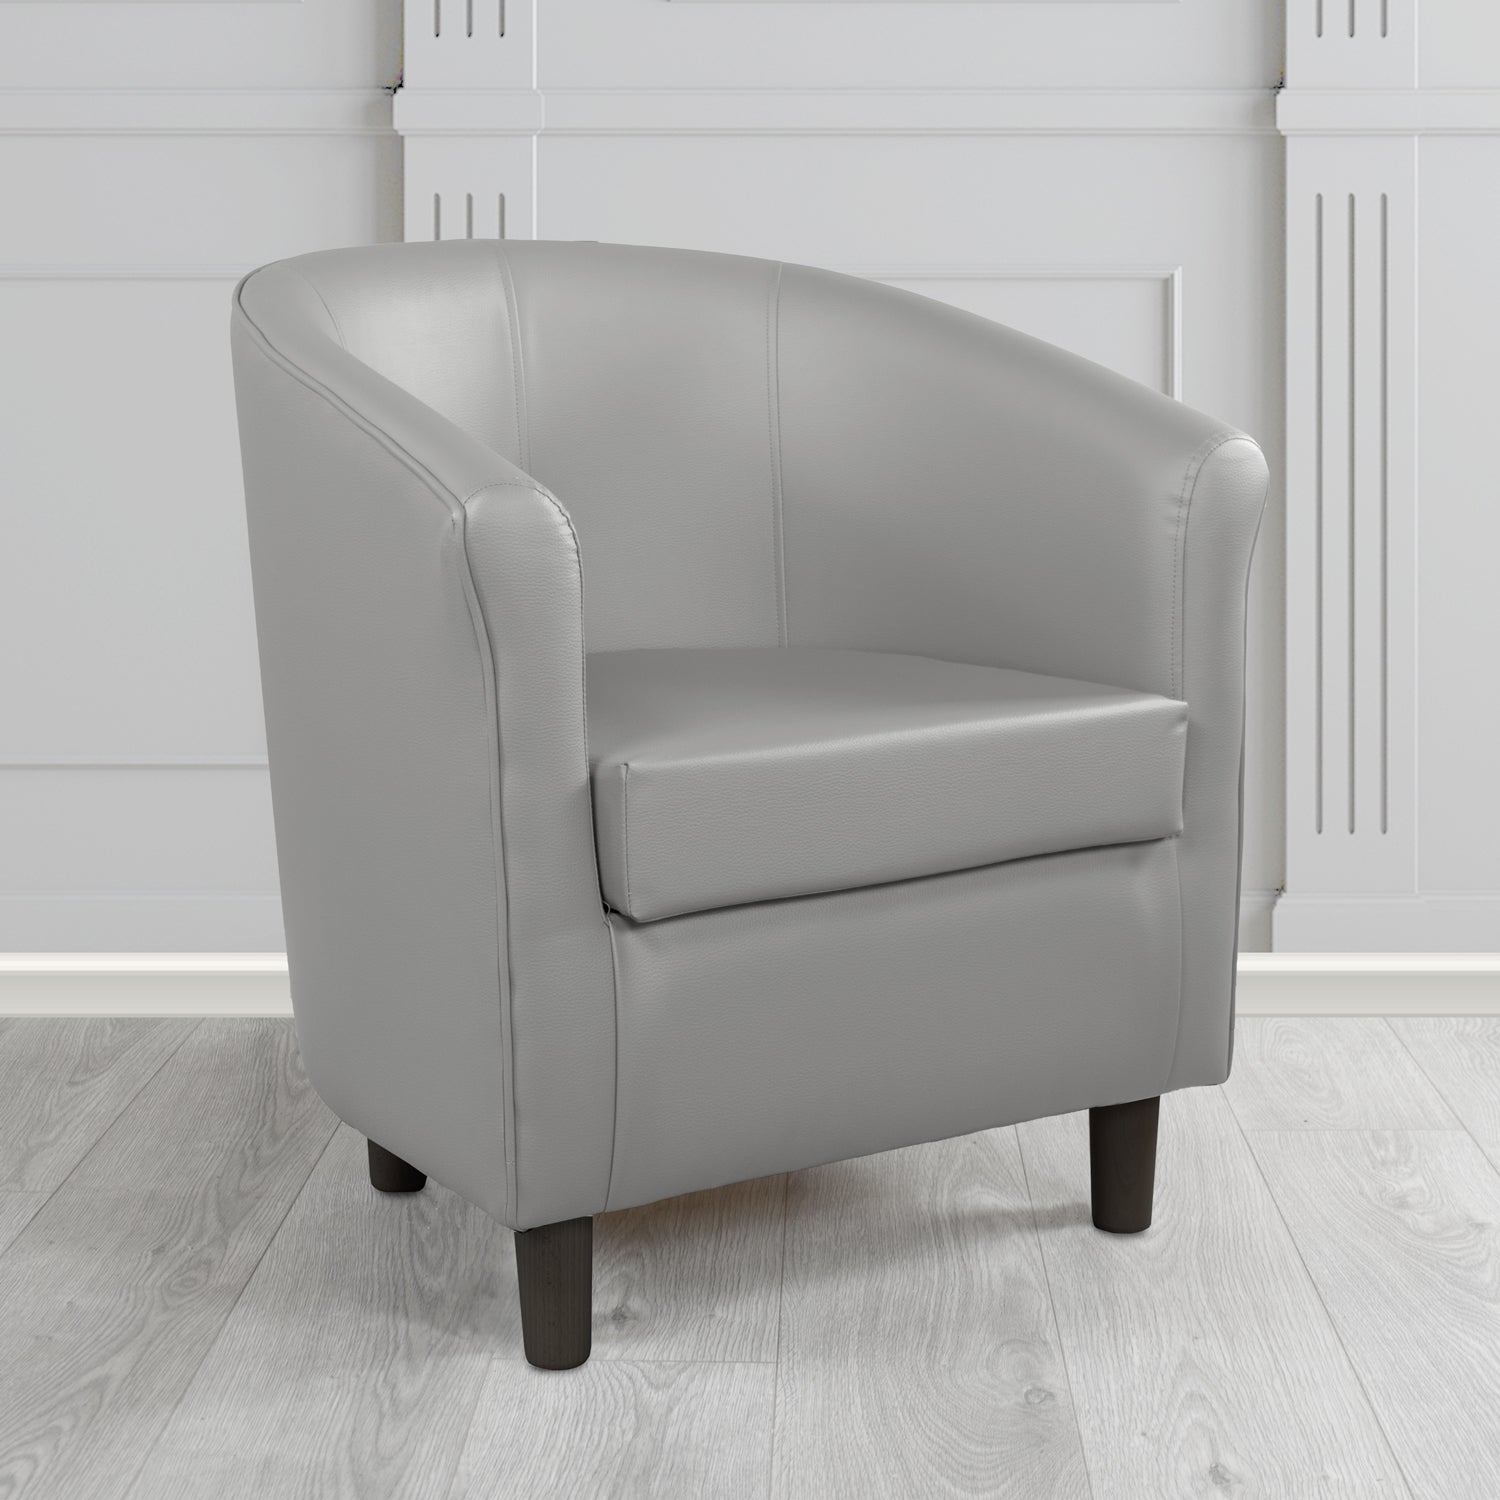 Tuscany Just Colour Koala Antimicrobial Crib 5 Contract Faux Leather Tub Chair - The Tub Chair Shop